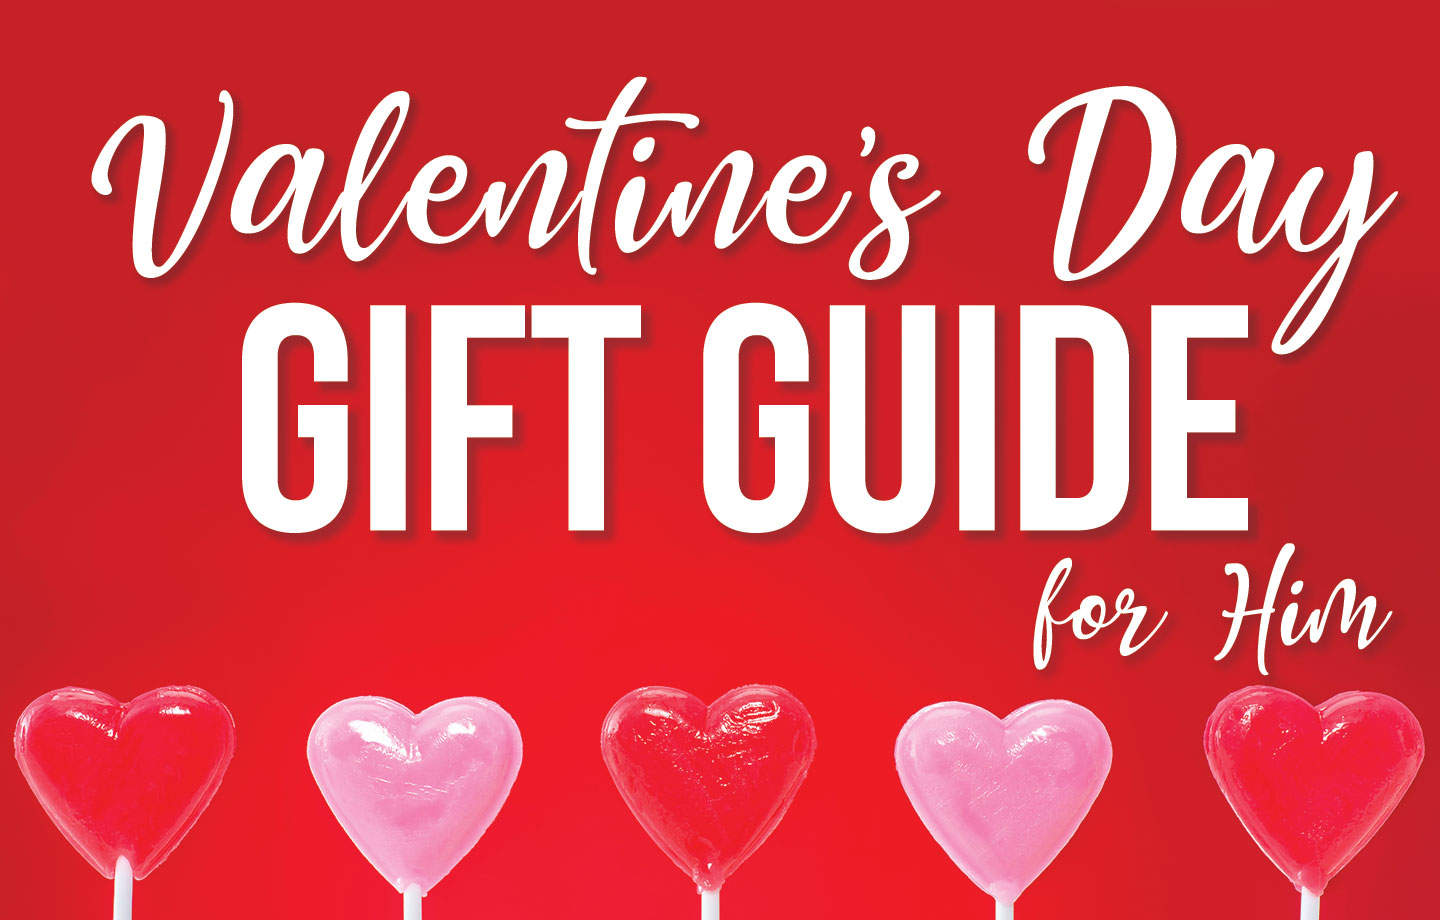 VALENTINES DAY GIFTS FOR HIM : VALENTINES DAY GIFTS FOR HIM UNDER $50